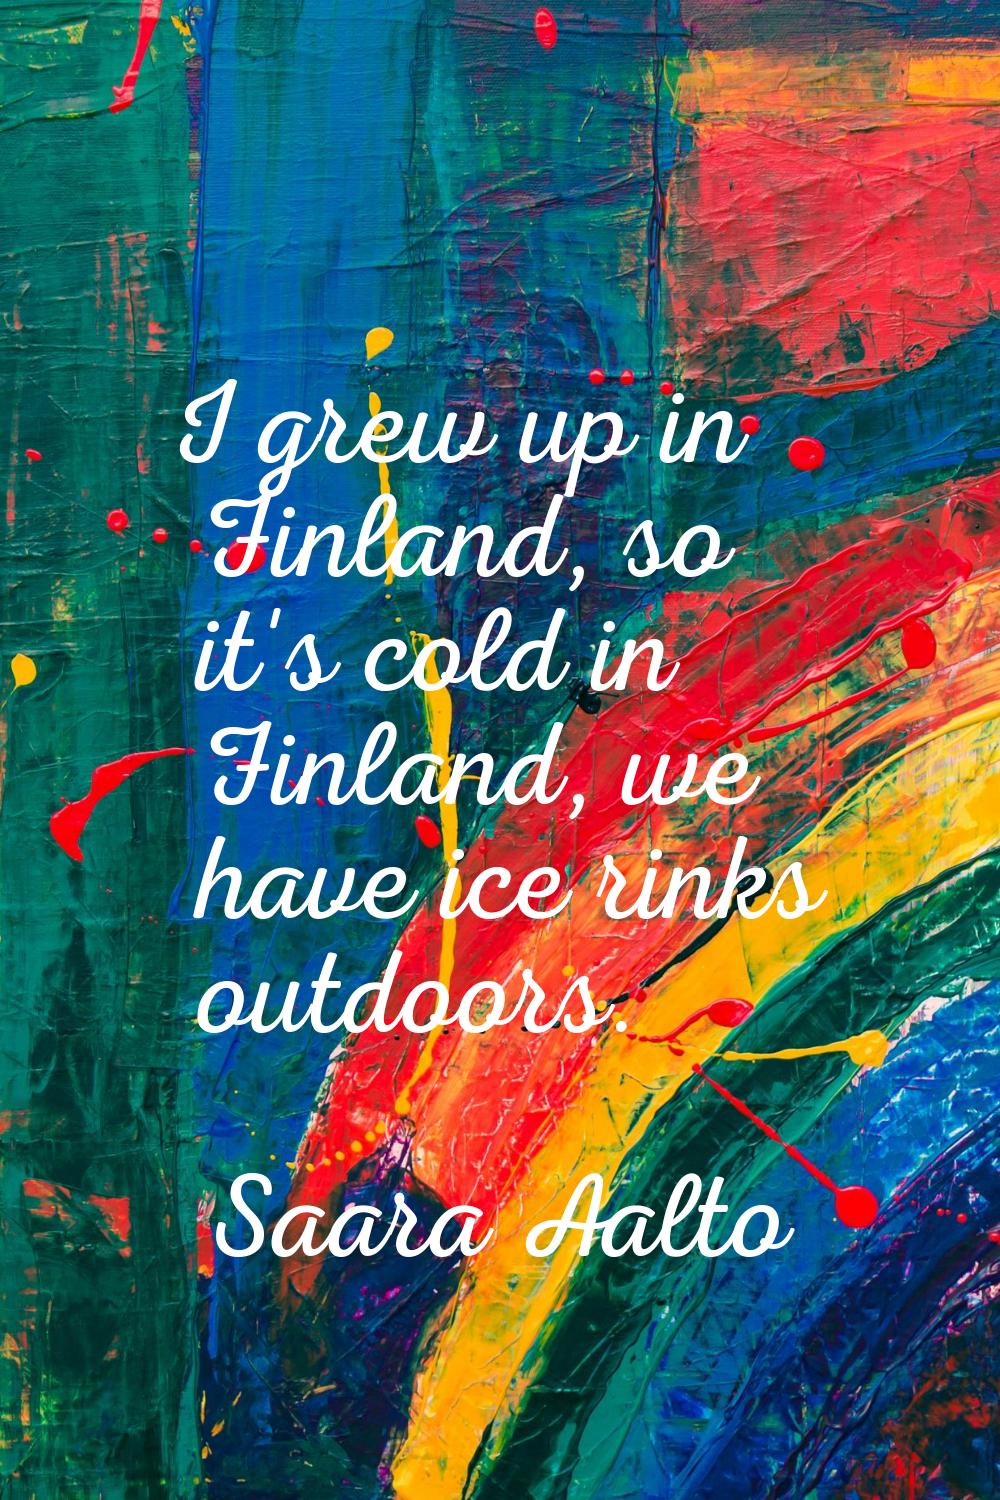 I grew up in Finland, so it's cold in Finland, we have ice rinks outdoors.